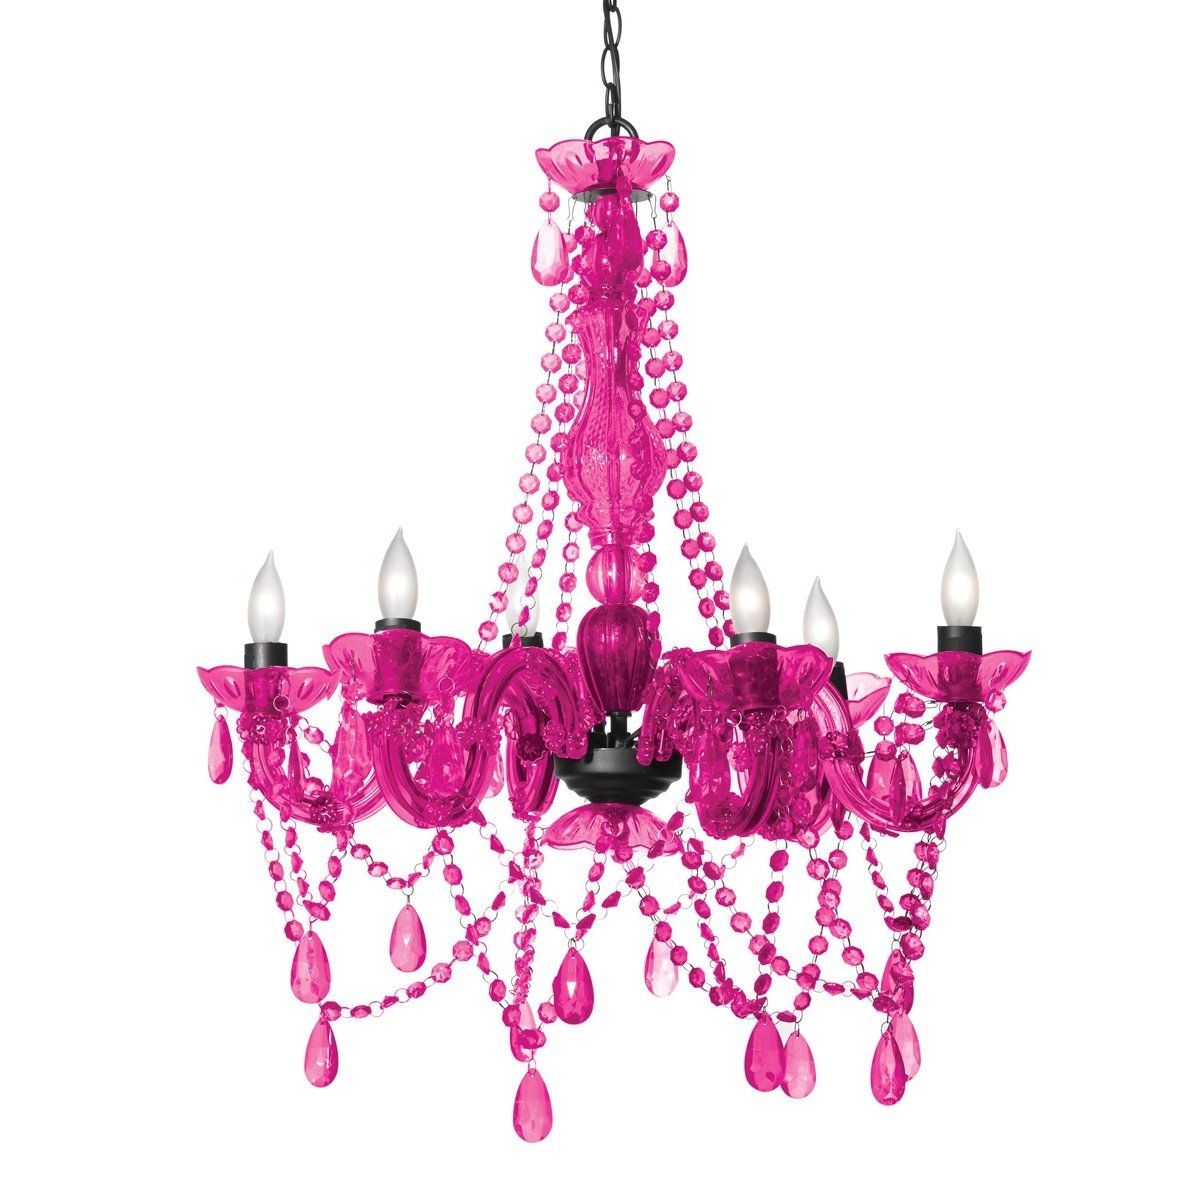 Total Fab Affordable Chandeliers For Girls To Teens Rooms Regarding Pink Gypsy Chandeliers (View 3 of 25)